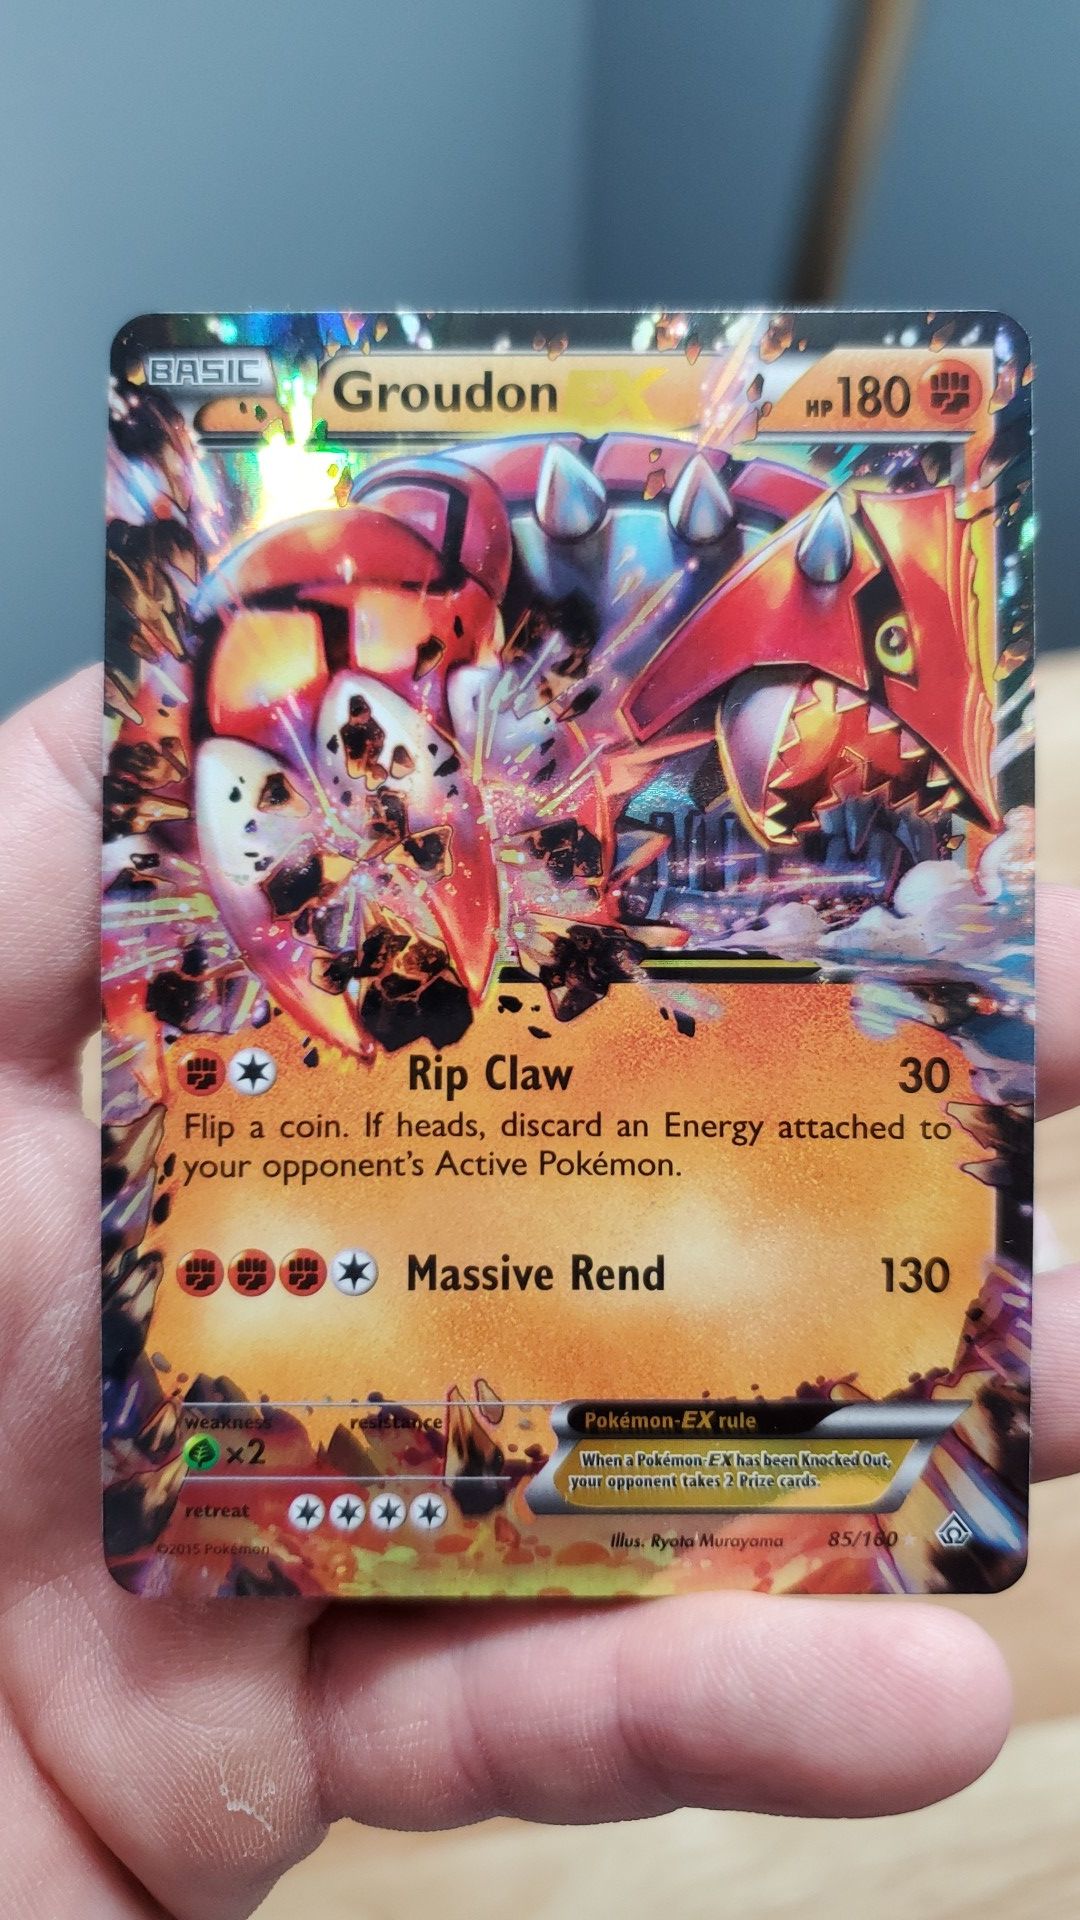 Holographic Groudon ex card